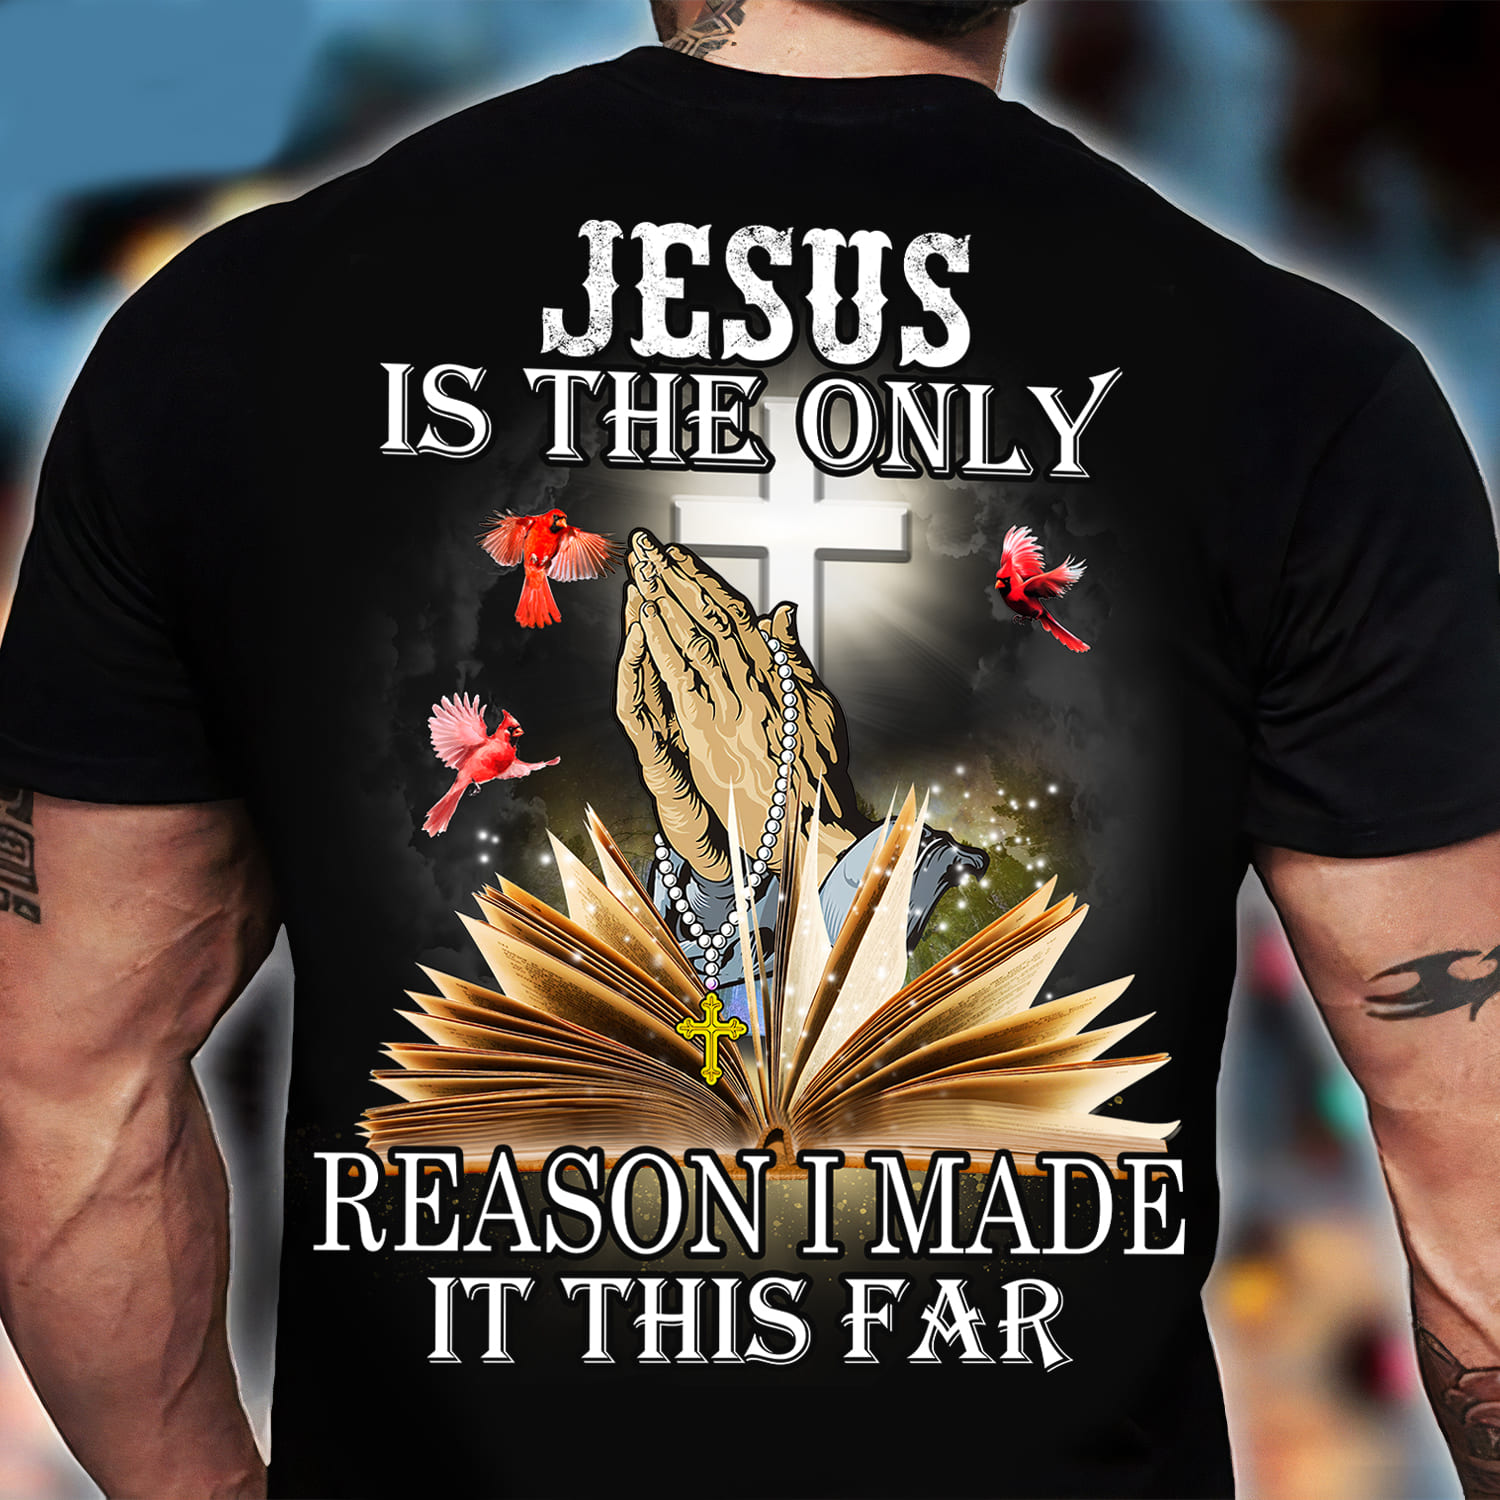 Pray God Bible Cardinal Bird - Jesus is the only reason i made it this far